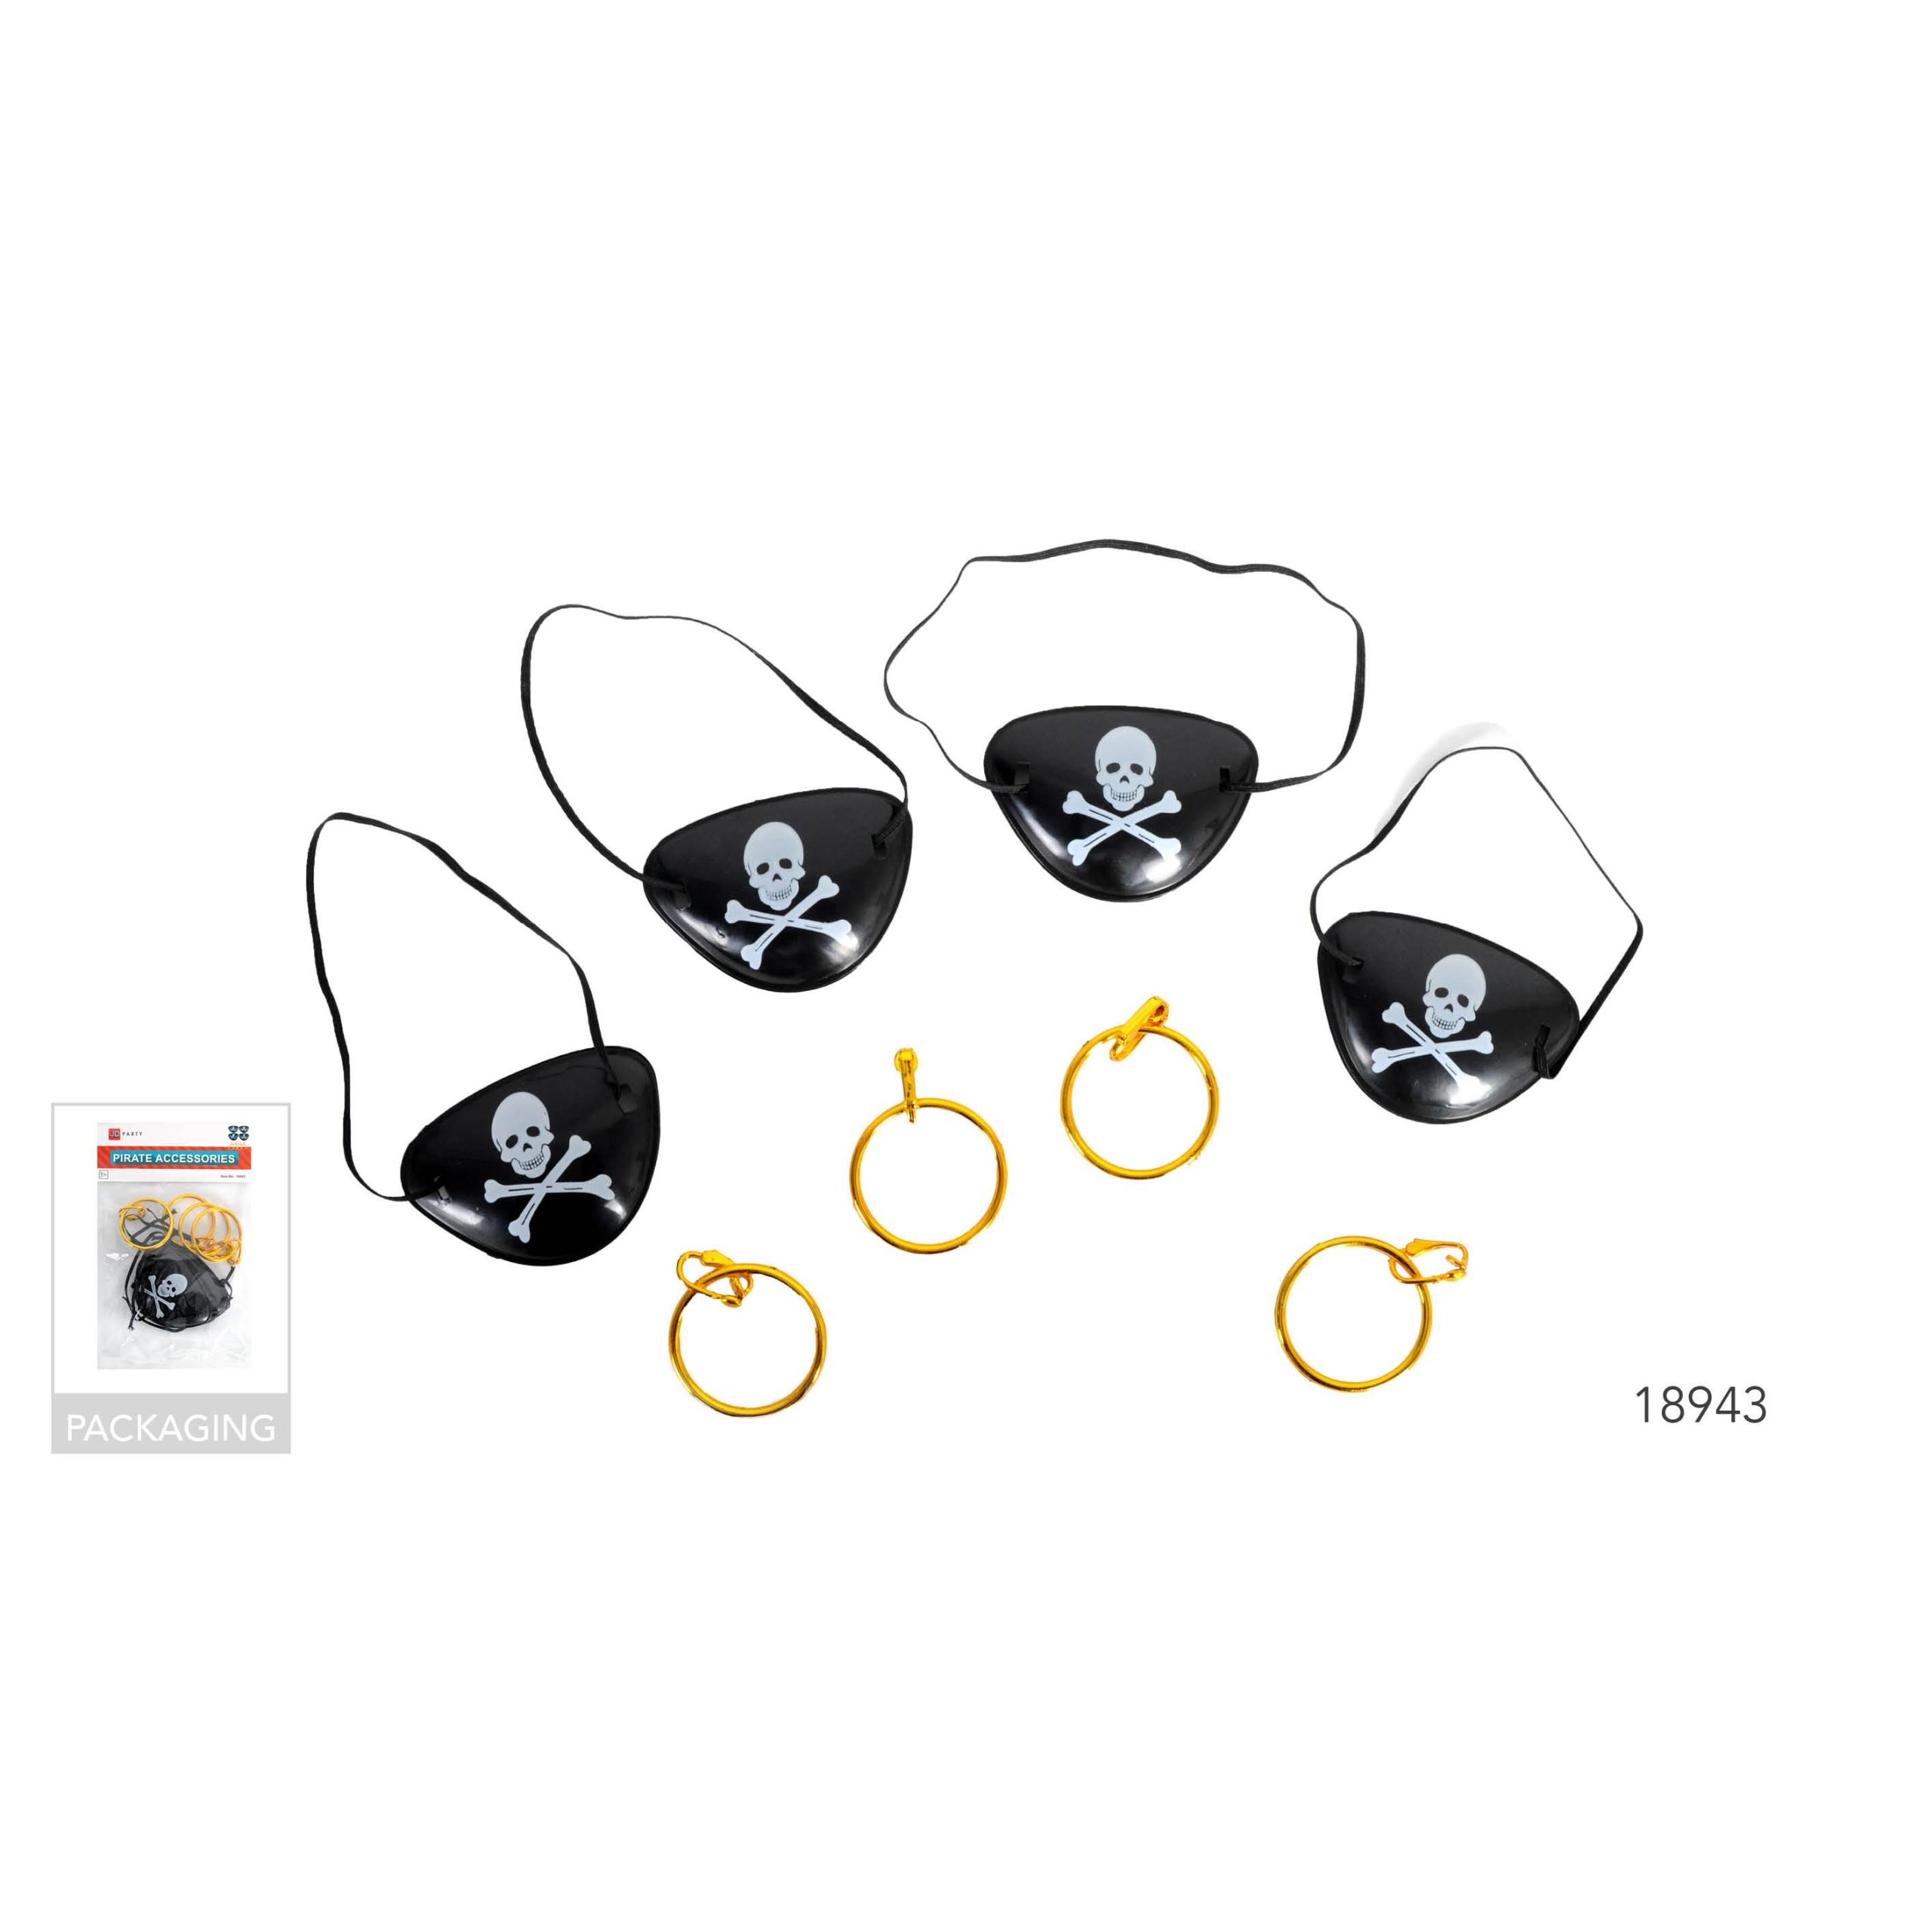 Pirate Eye Patched and Earrings Set – Events, Book Week (PGE-10028)